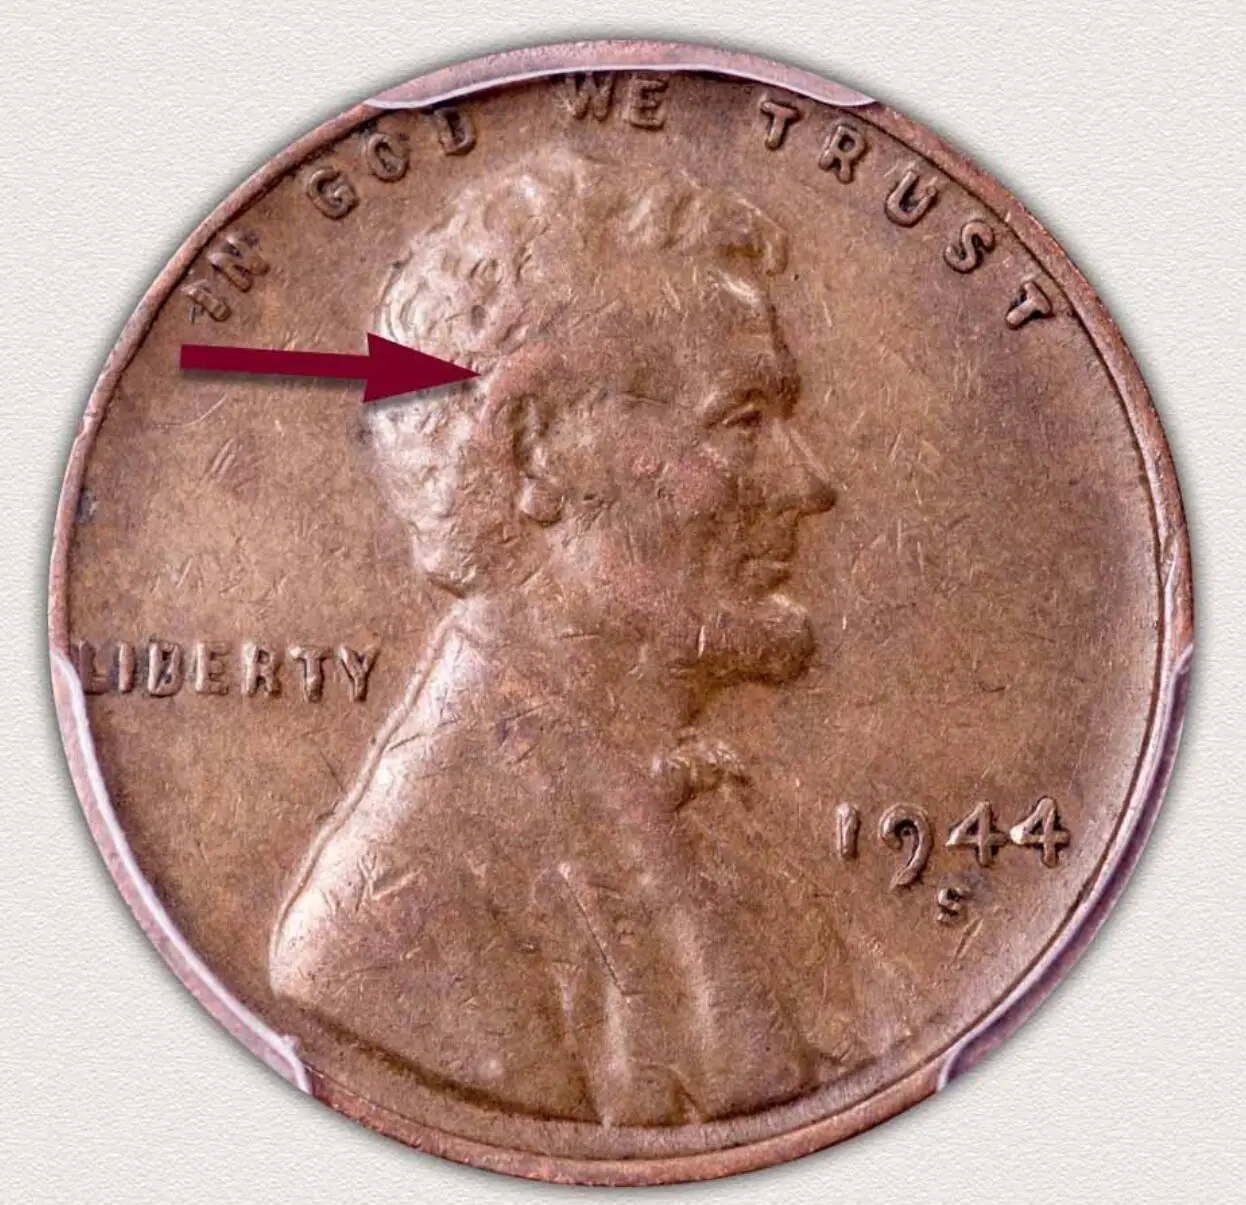 Grading The 1944 Copper Penny